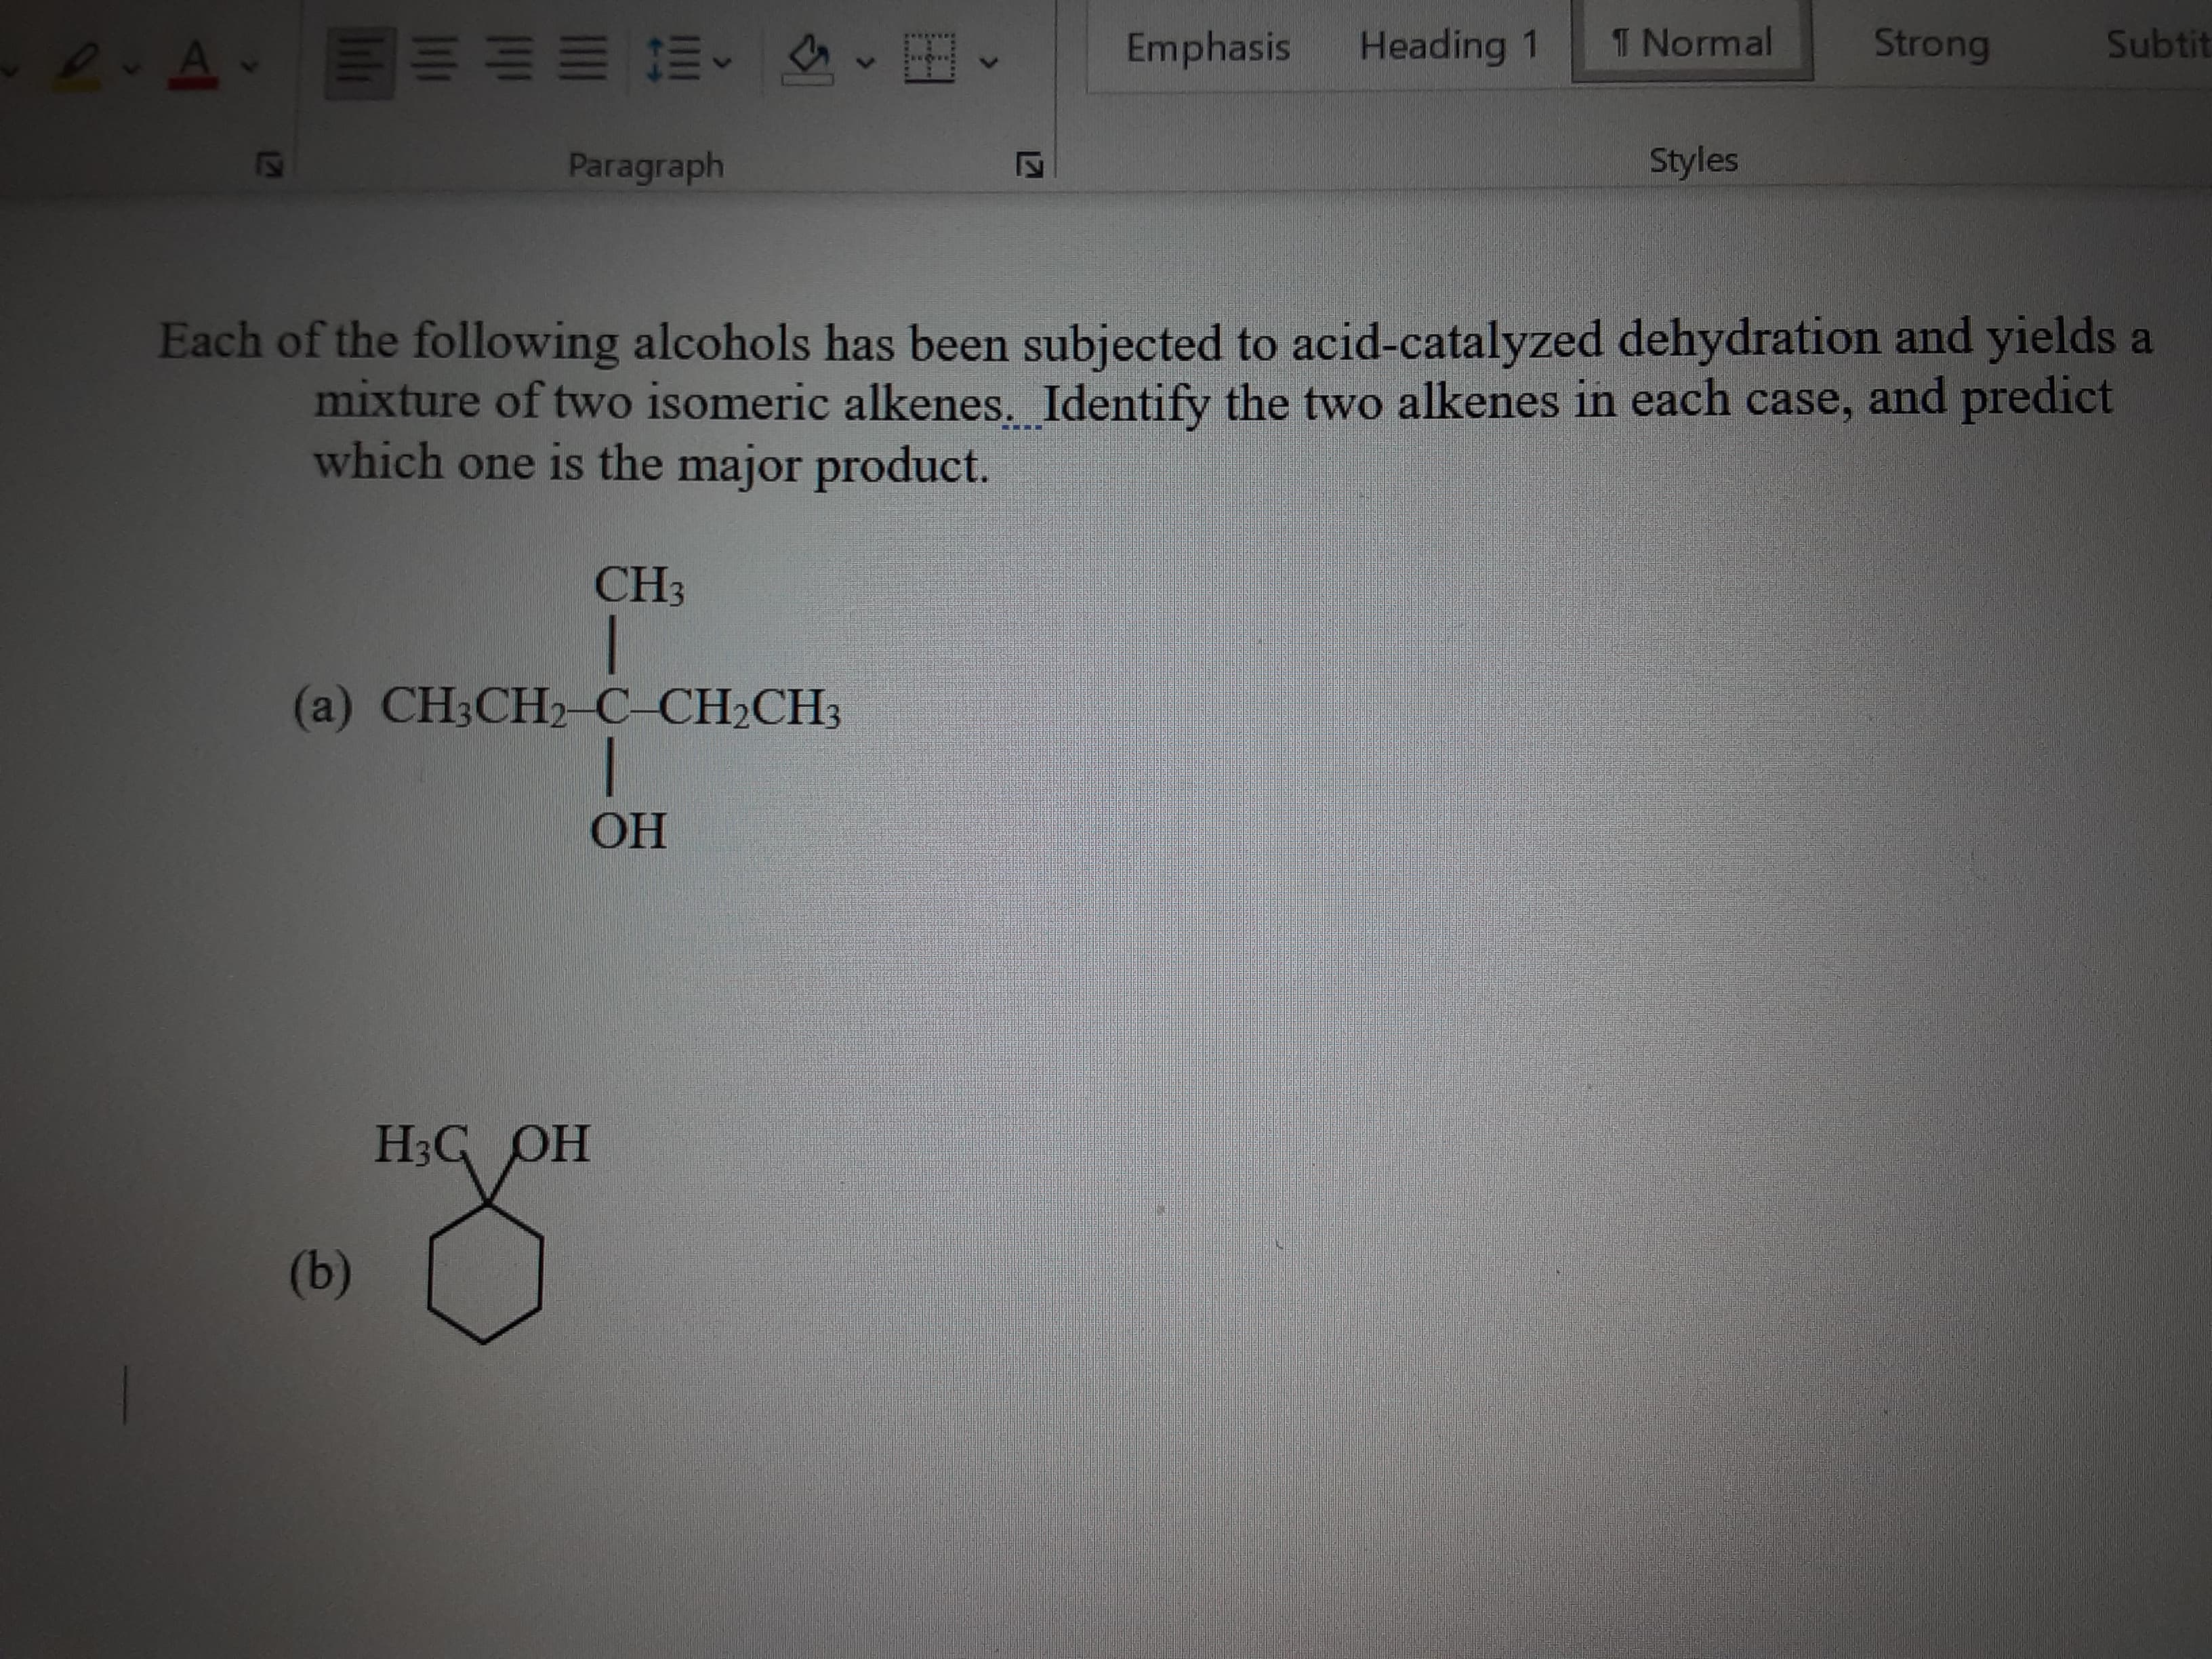 (9)
НО
(a) CH3CH2-C-CH2CH3
CH3
mixture of two isomeric alkenes. Identify the two alkenes in each case, and predict
Each of the following alcohols has been subjected to acid-catalyzed dehydration and yields a
which one is the major product.
Styles
Paragraph
Subtit
Strong
Heading 1
Emphasis
1 Normal
